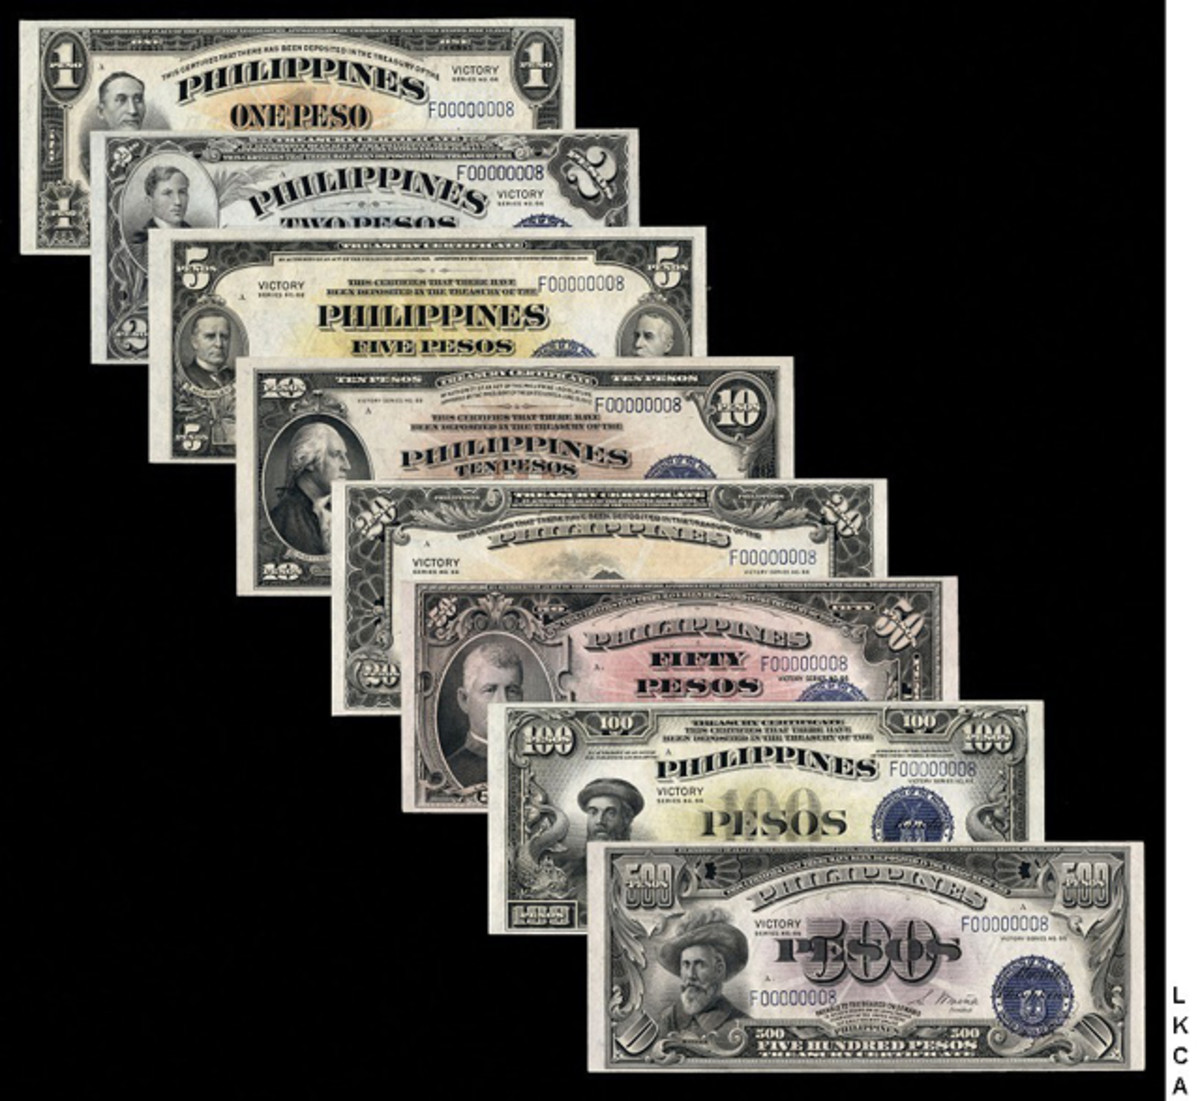 Top-selling complete Philippines VICTORY Series No. 66 set, one to 500 pesos (P-94, -95a, -96, -97, -98a, -99a, -100a, -101a) all with serial number #0000008 that realized $28,200.